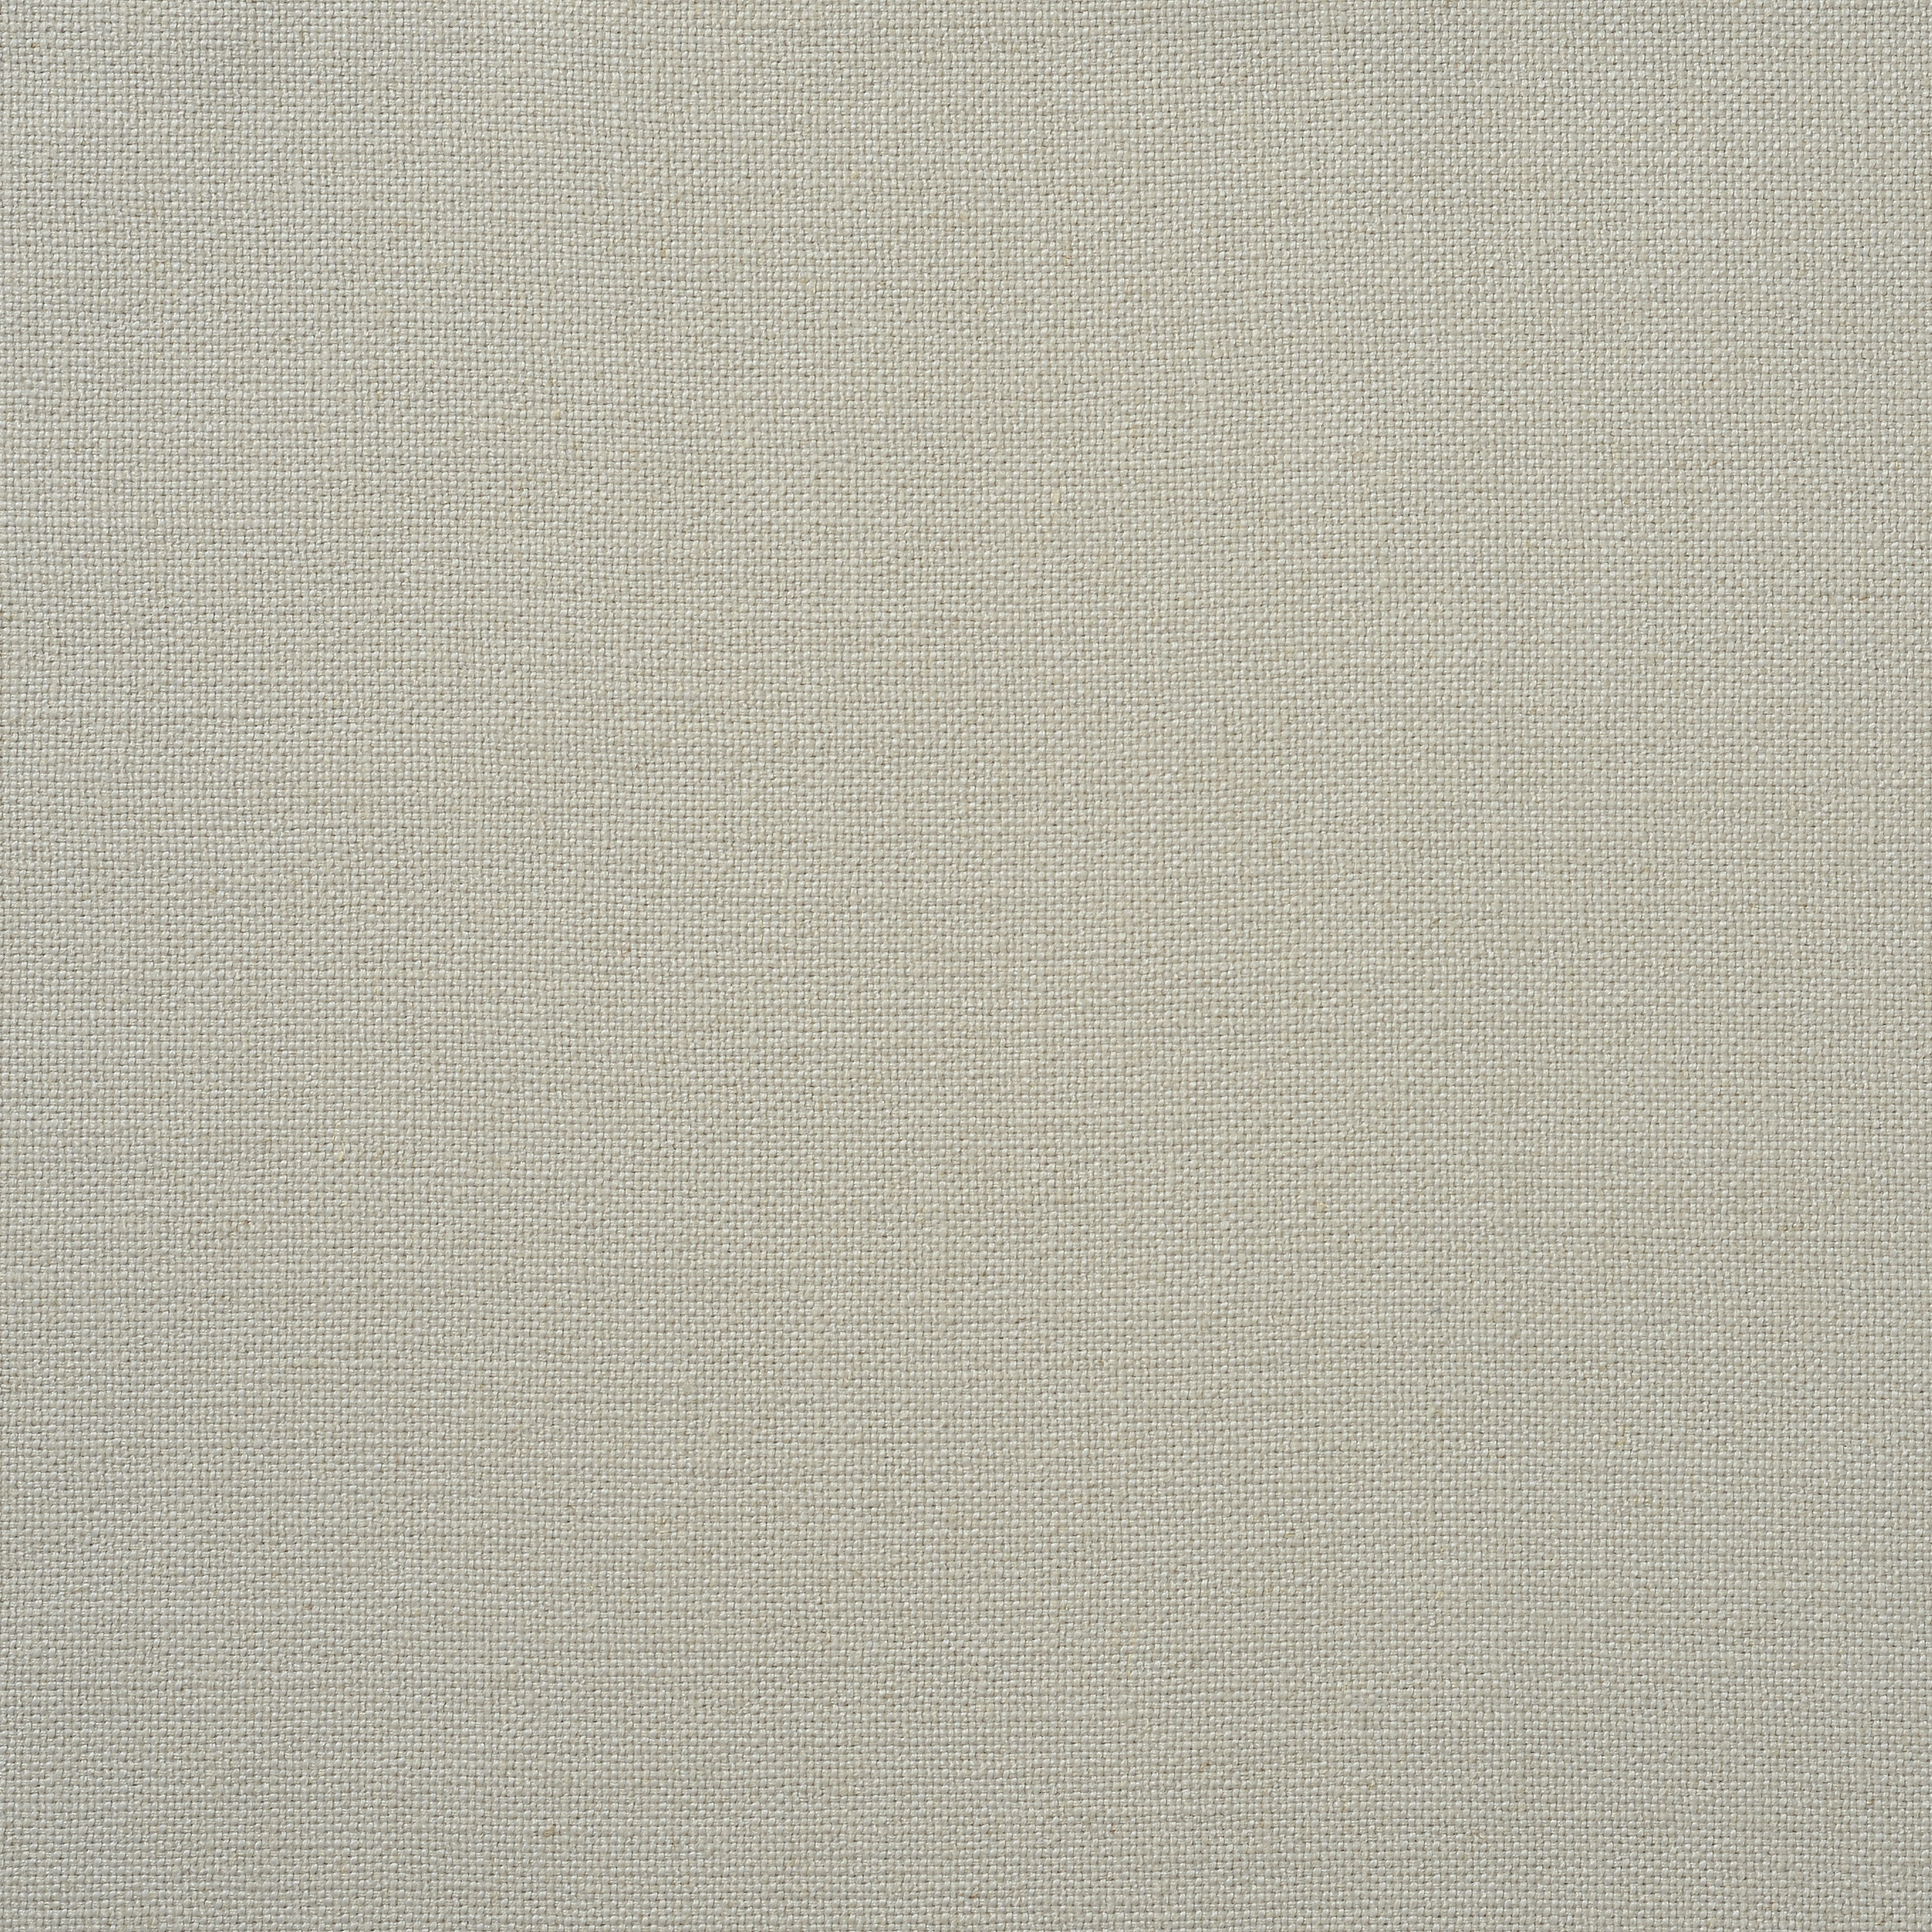 Ashbee Easyclean Linen Mix - Lily White